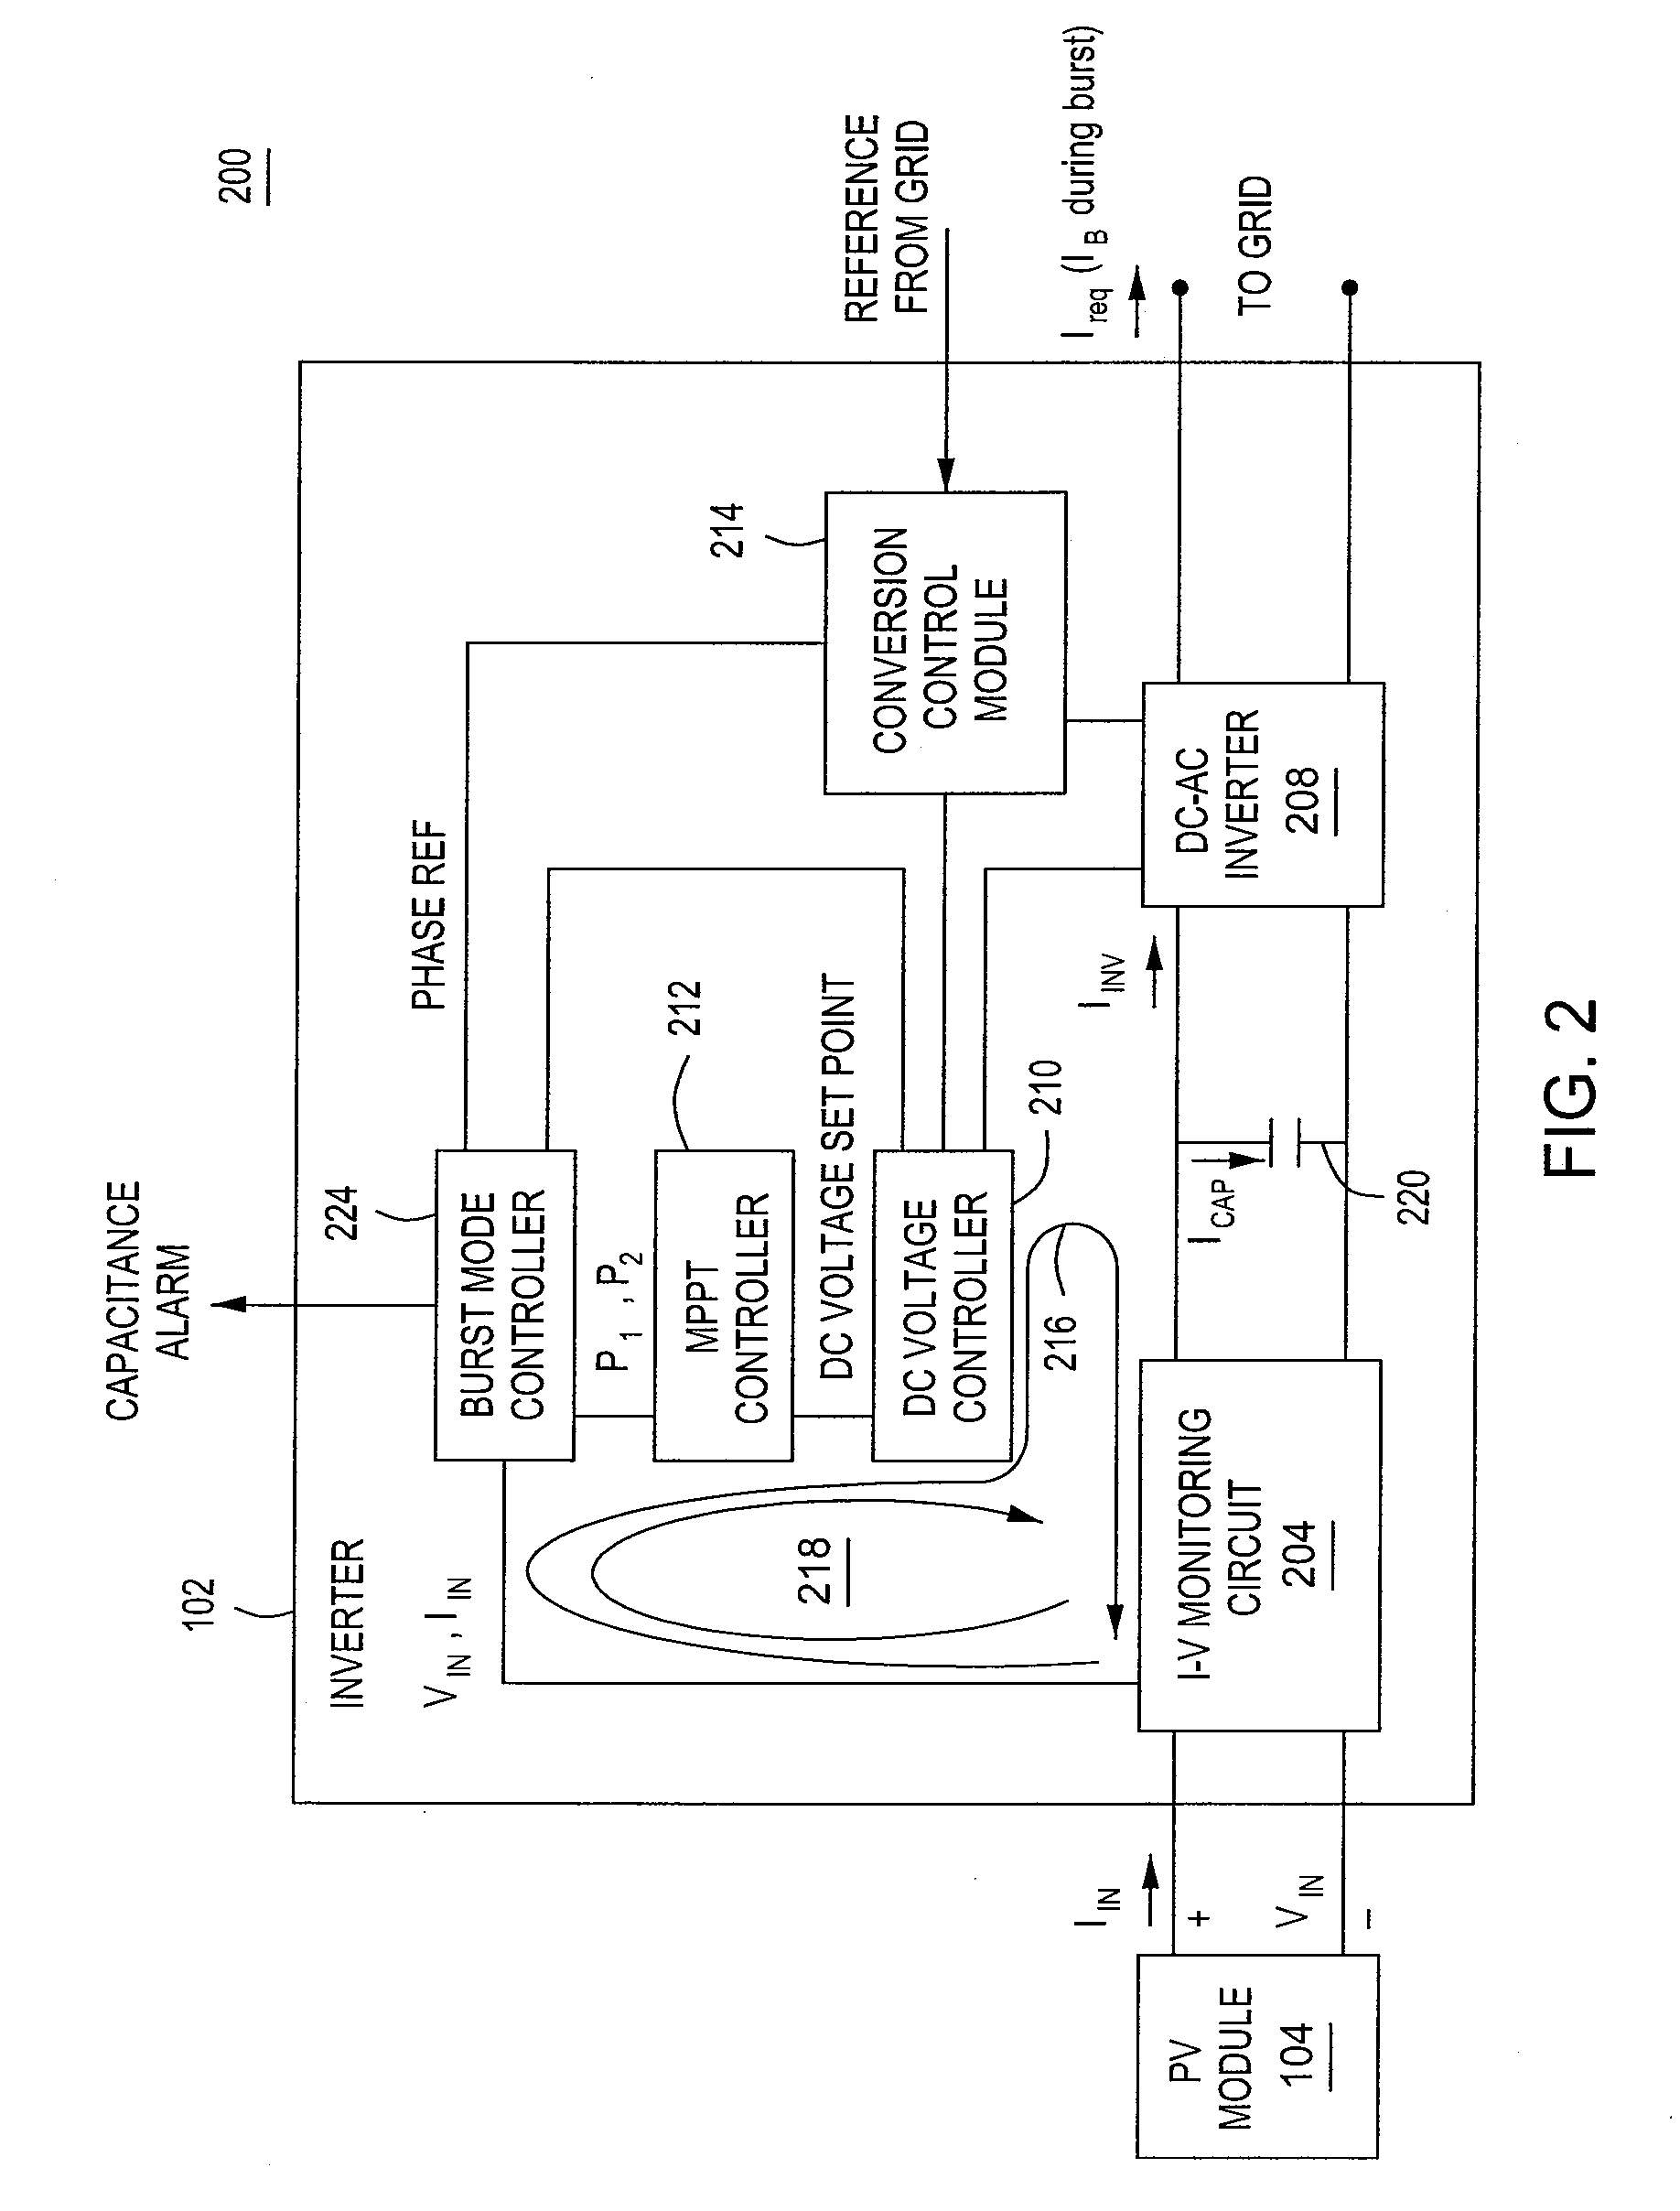 Method and apparatus for improved burst mode during power conversion